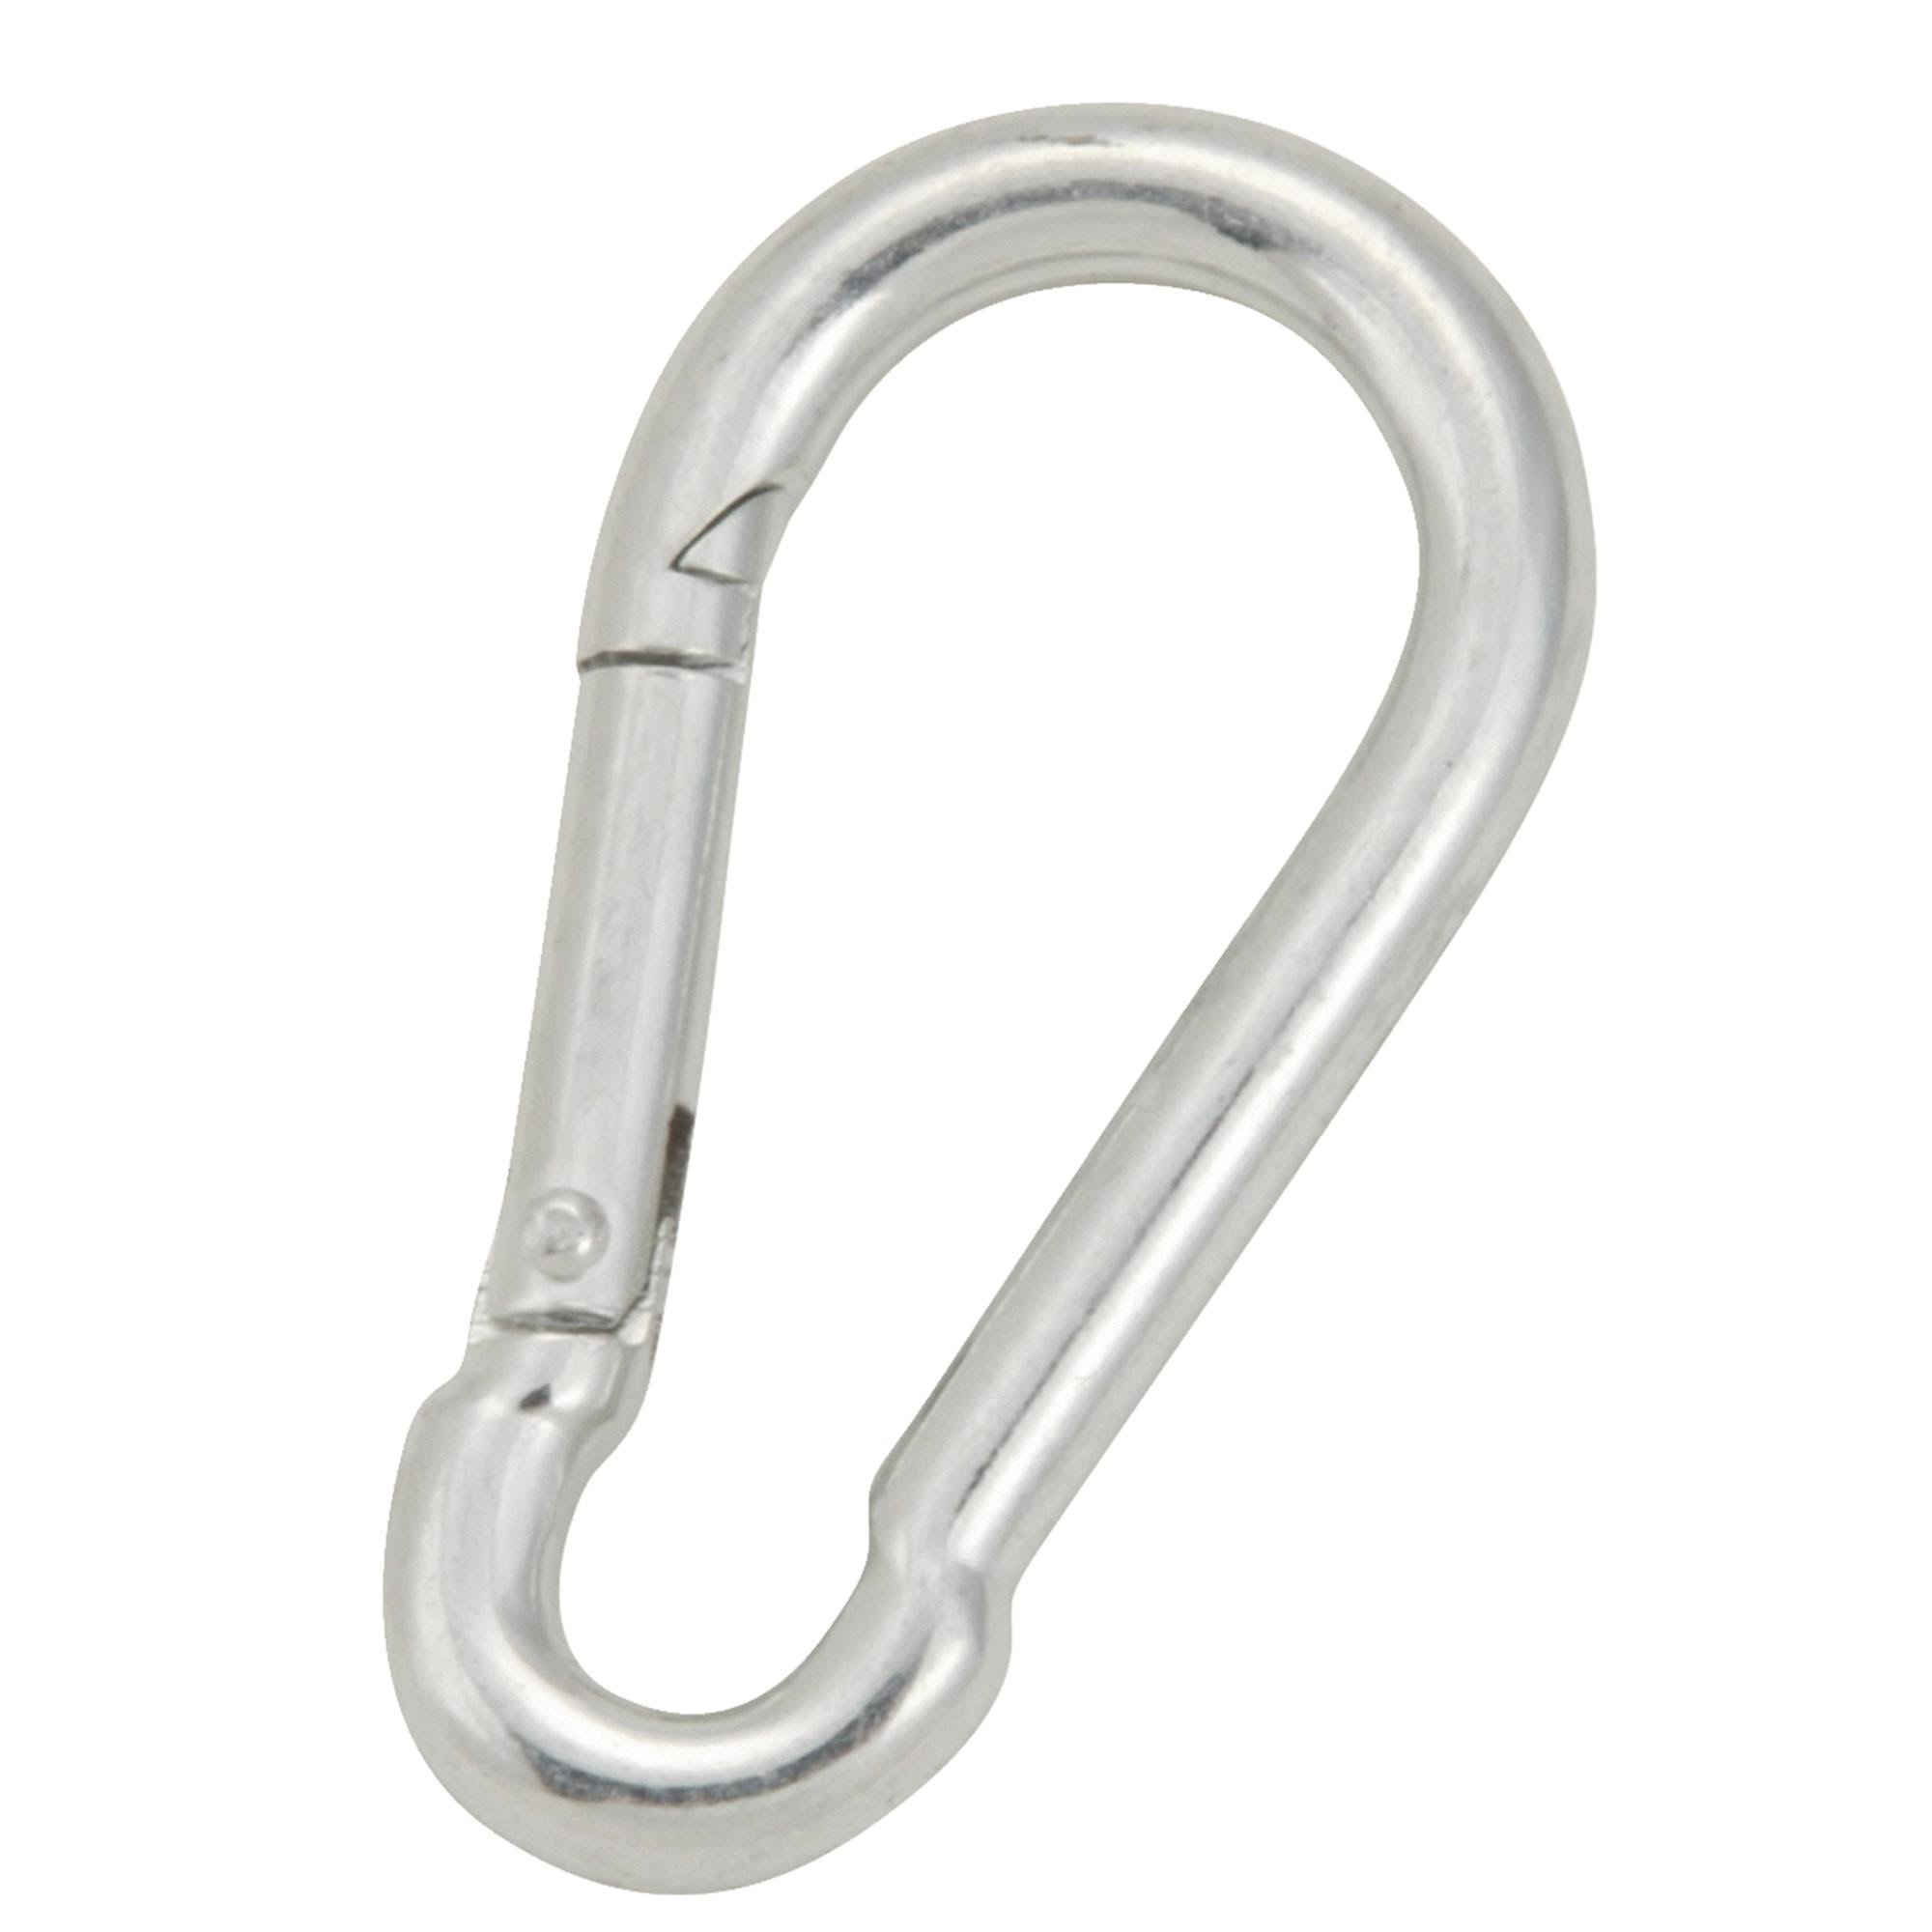 Campbell Chain Apex Cooper Spring Snap Link, 5/16"